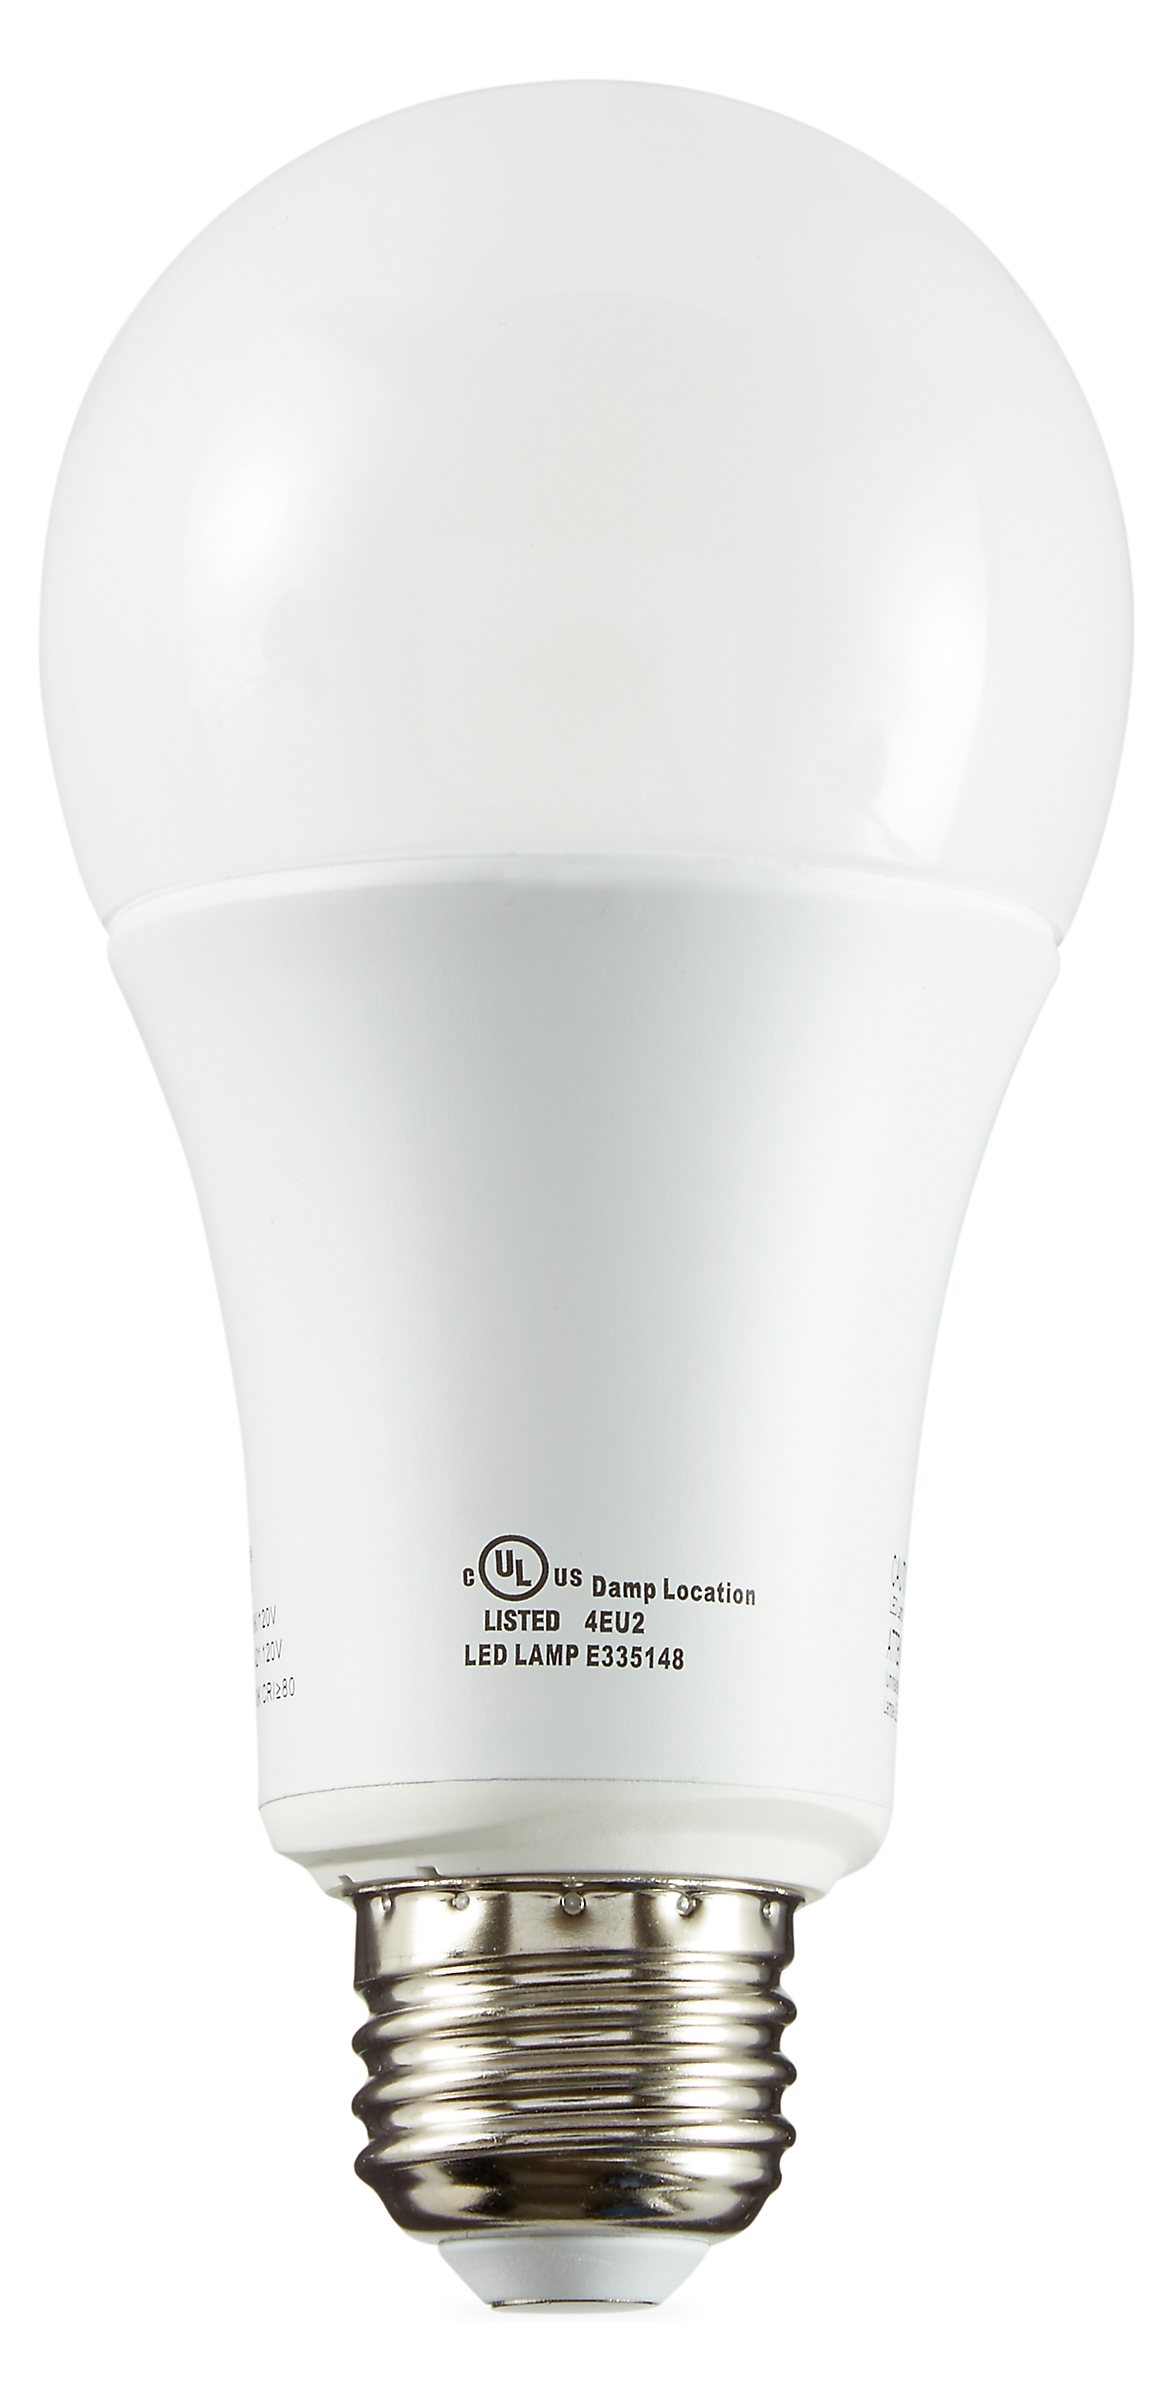 R&B LED Non-Dimmable Bulb (100W Comparable) 4 Pack